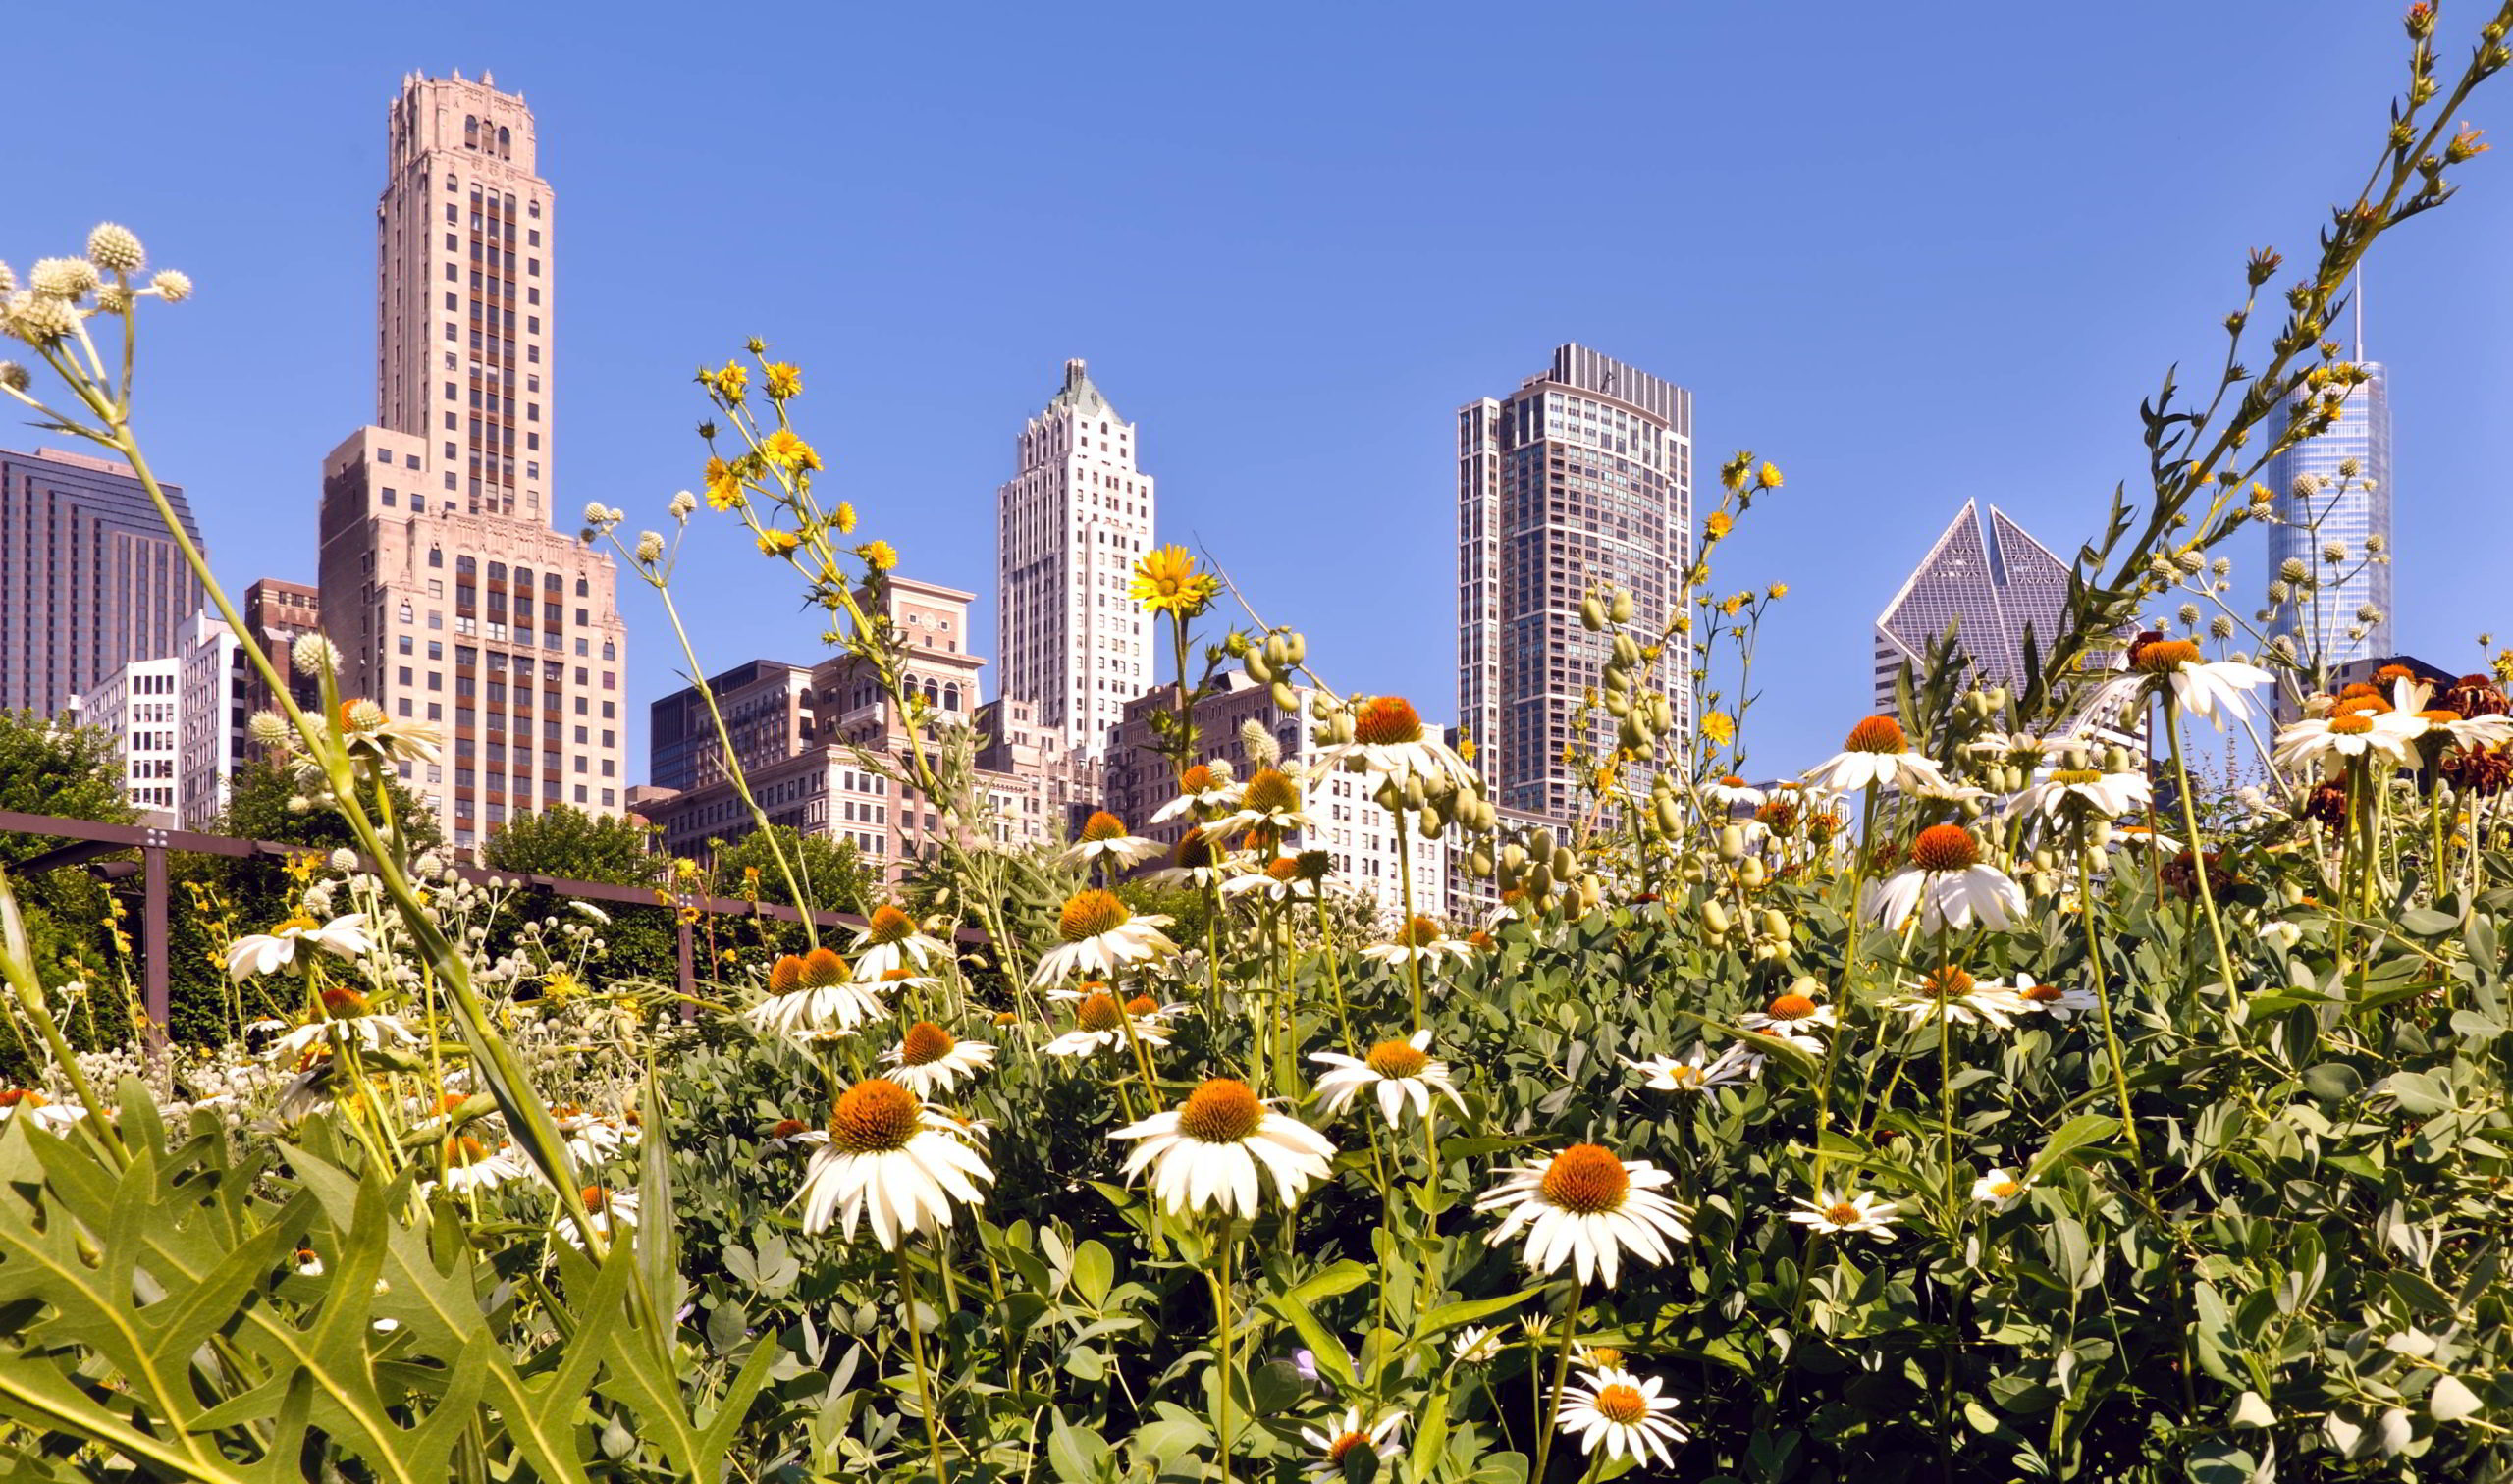 Image of daises with tall buildings in background.